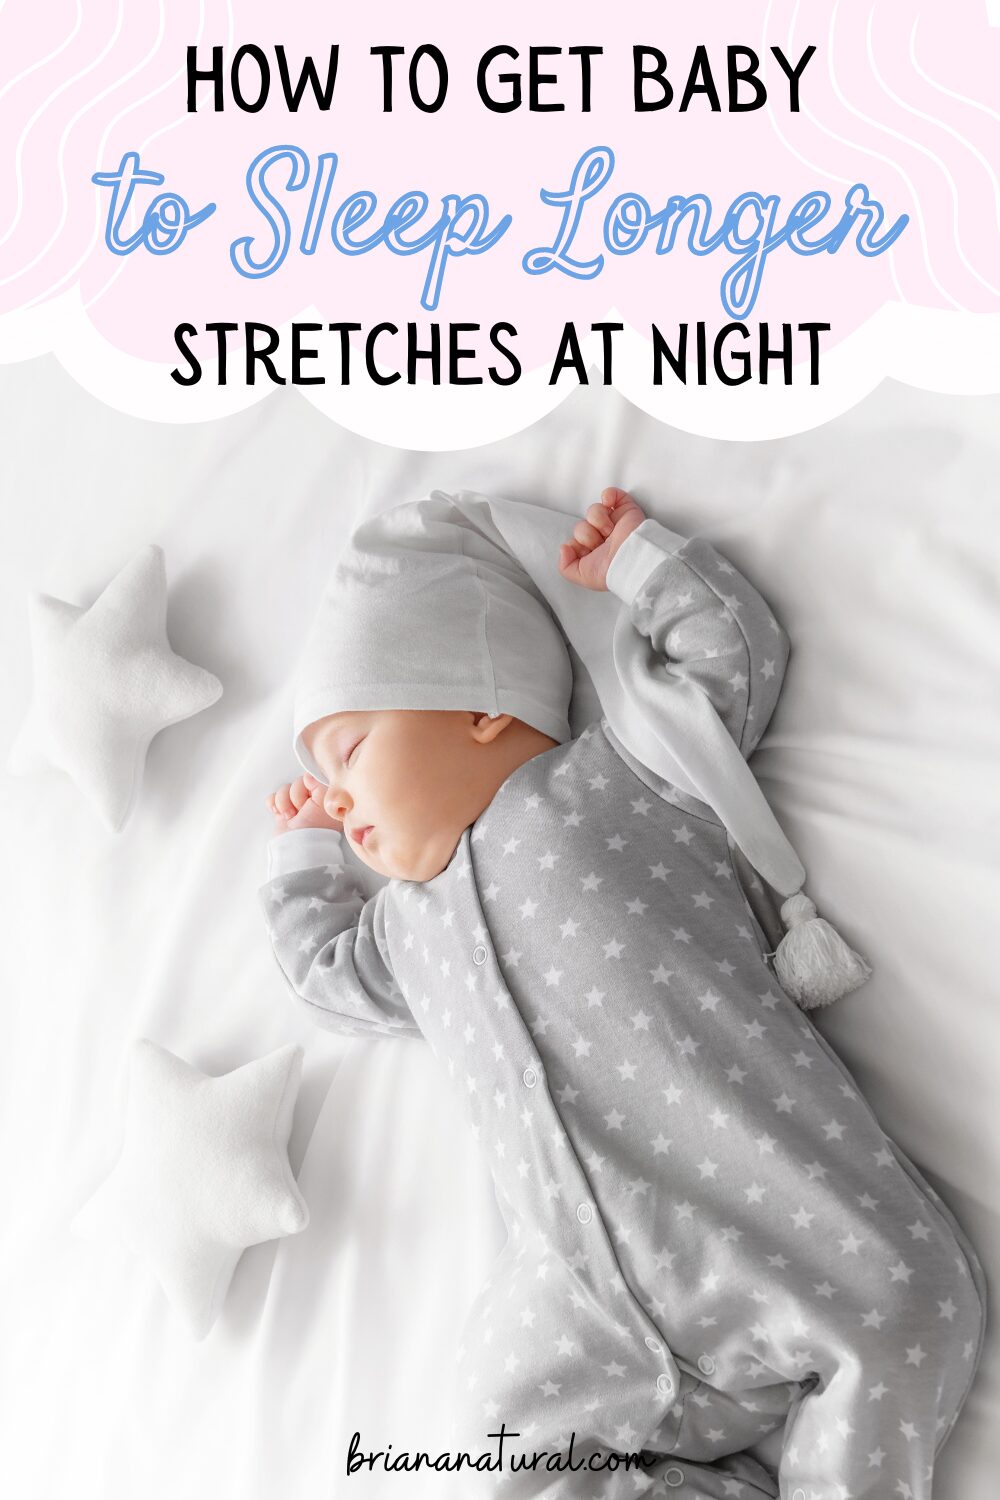 Cover photo stating "how to get baby to sleep longer stretches at night"